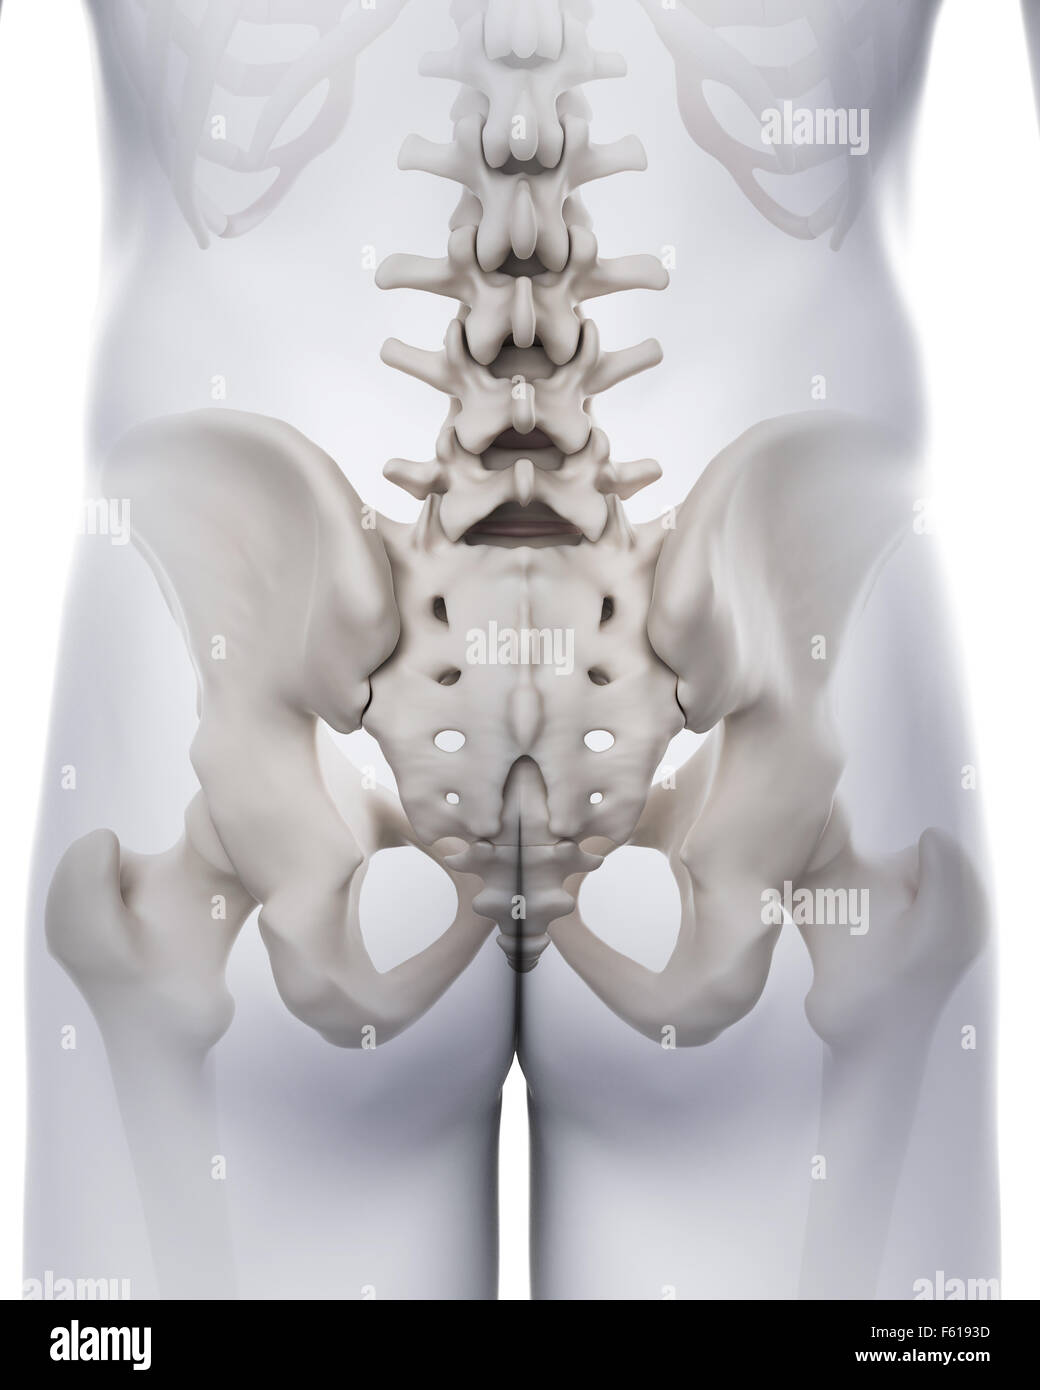 medically accurate illustration of the sacrum Stock Photo